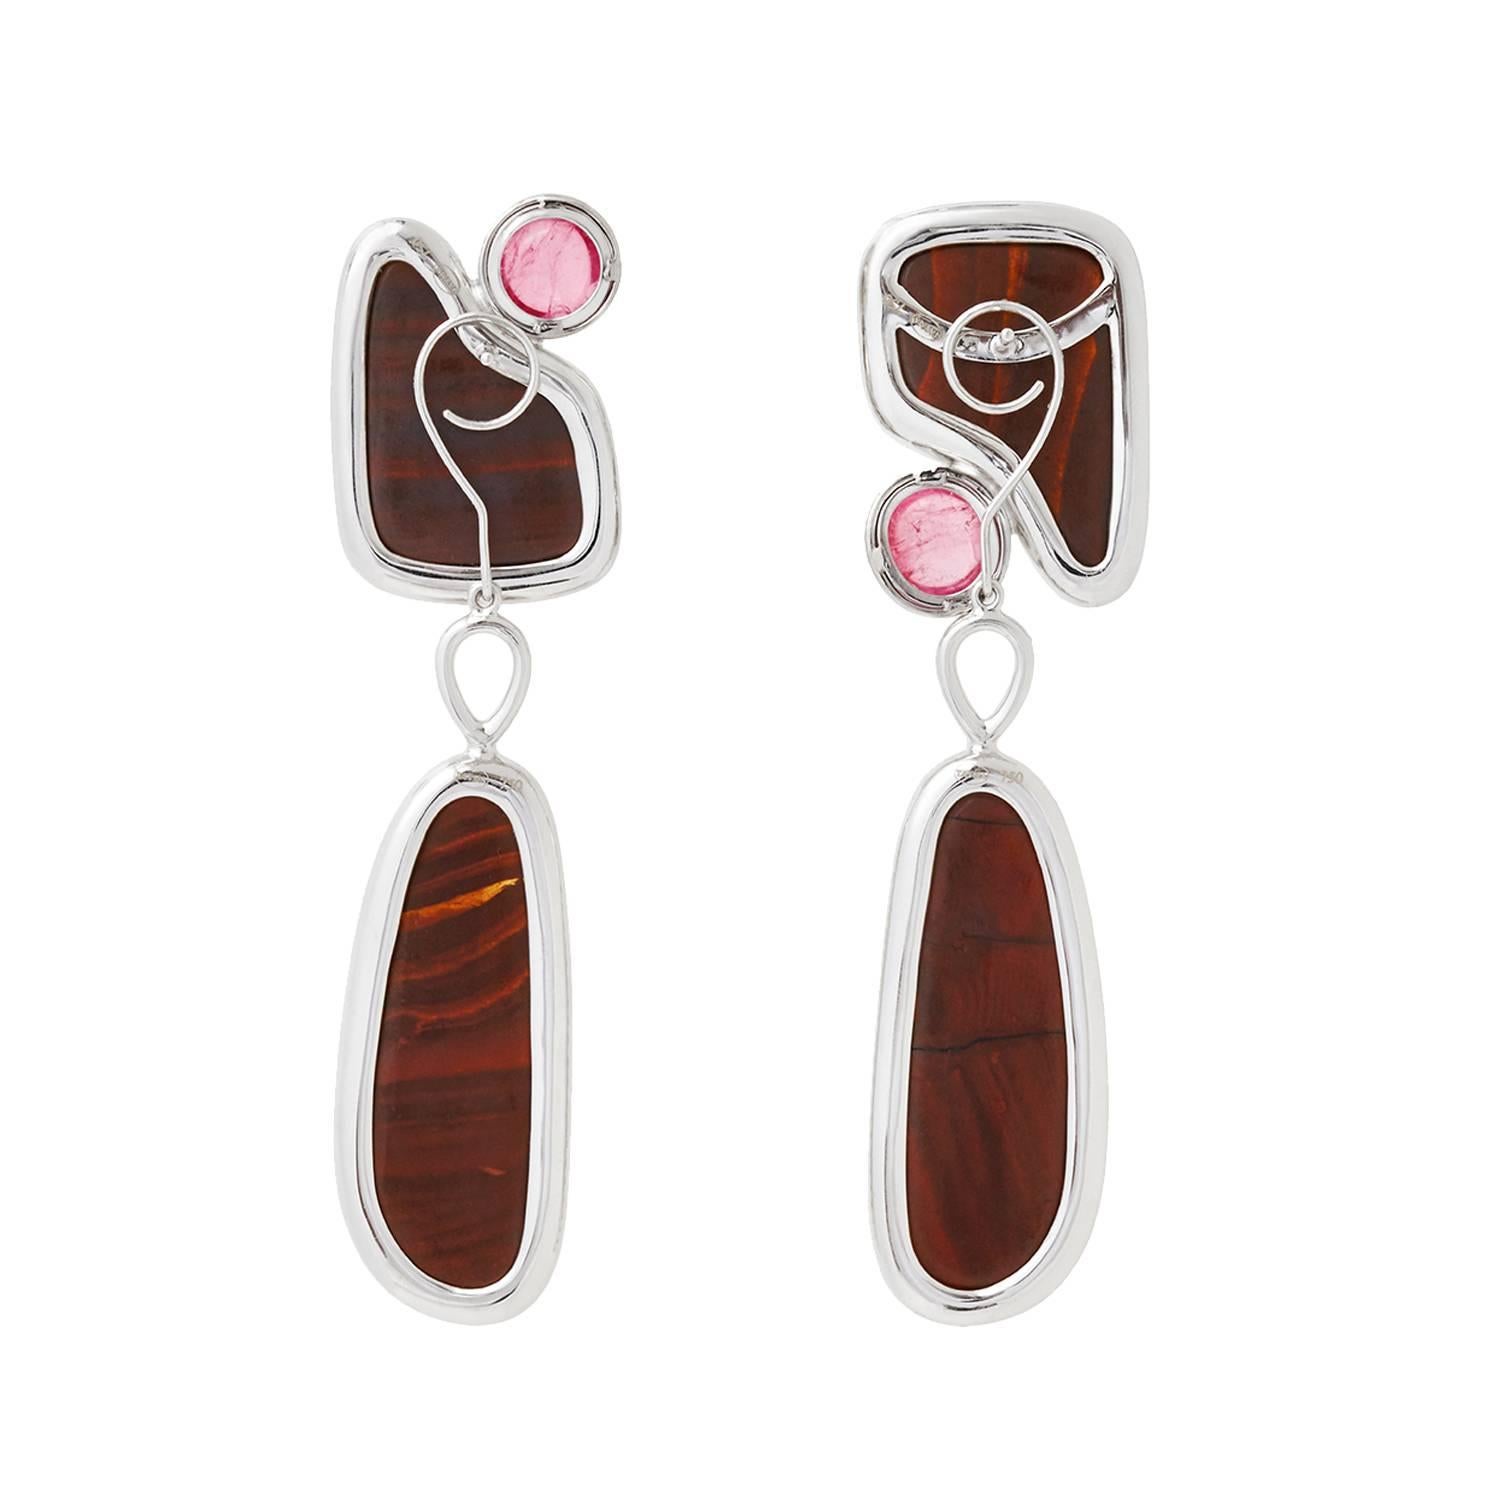 This pair of artistic Bushfire opal earrings accented with cabochon Rubellites and diamonds would make a perfect conversation pieces. The earrings are interchangeable for an easy switch from office to gala.

Gemstone information: 
4 Opals